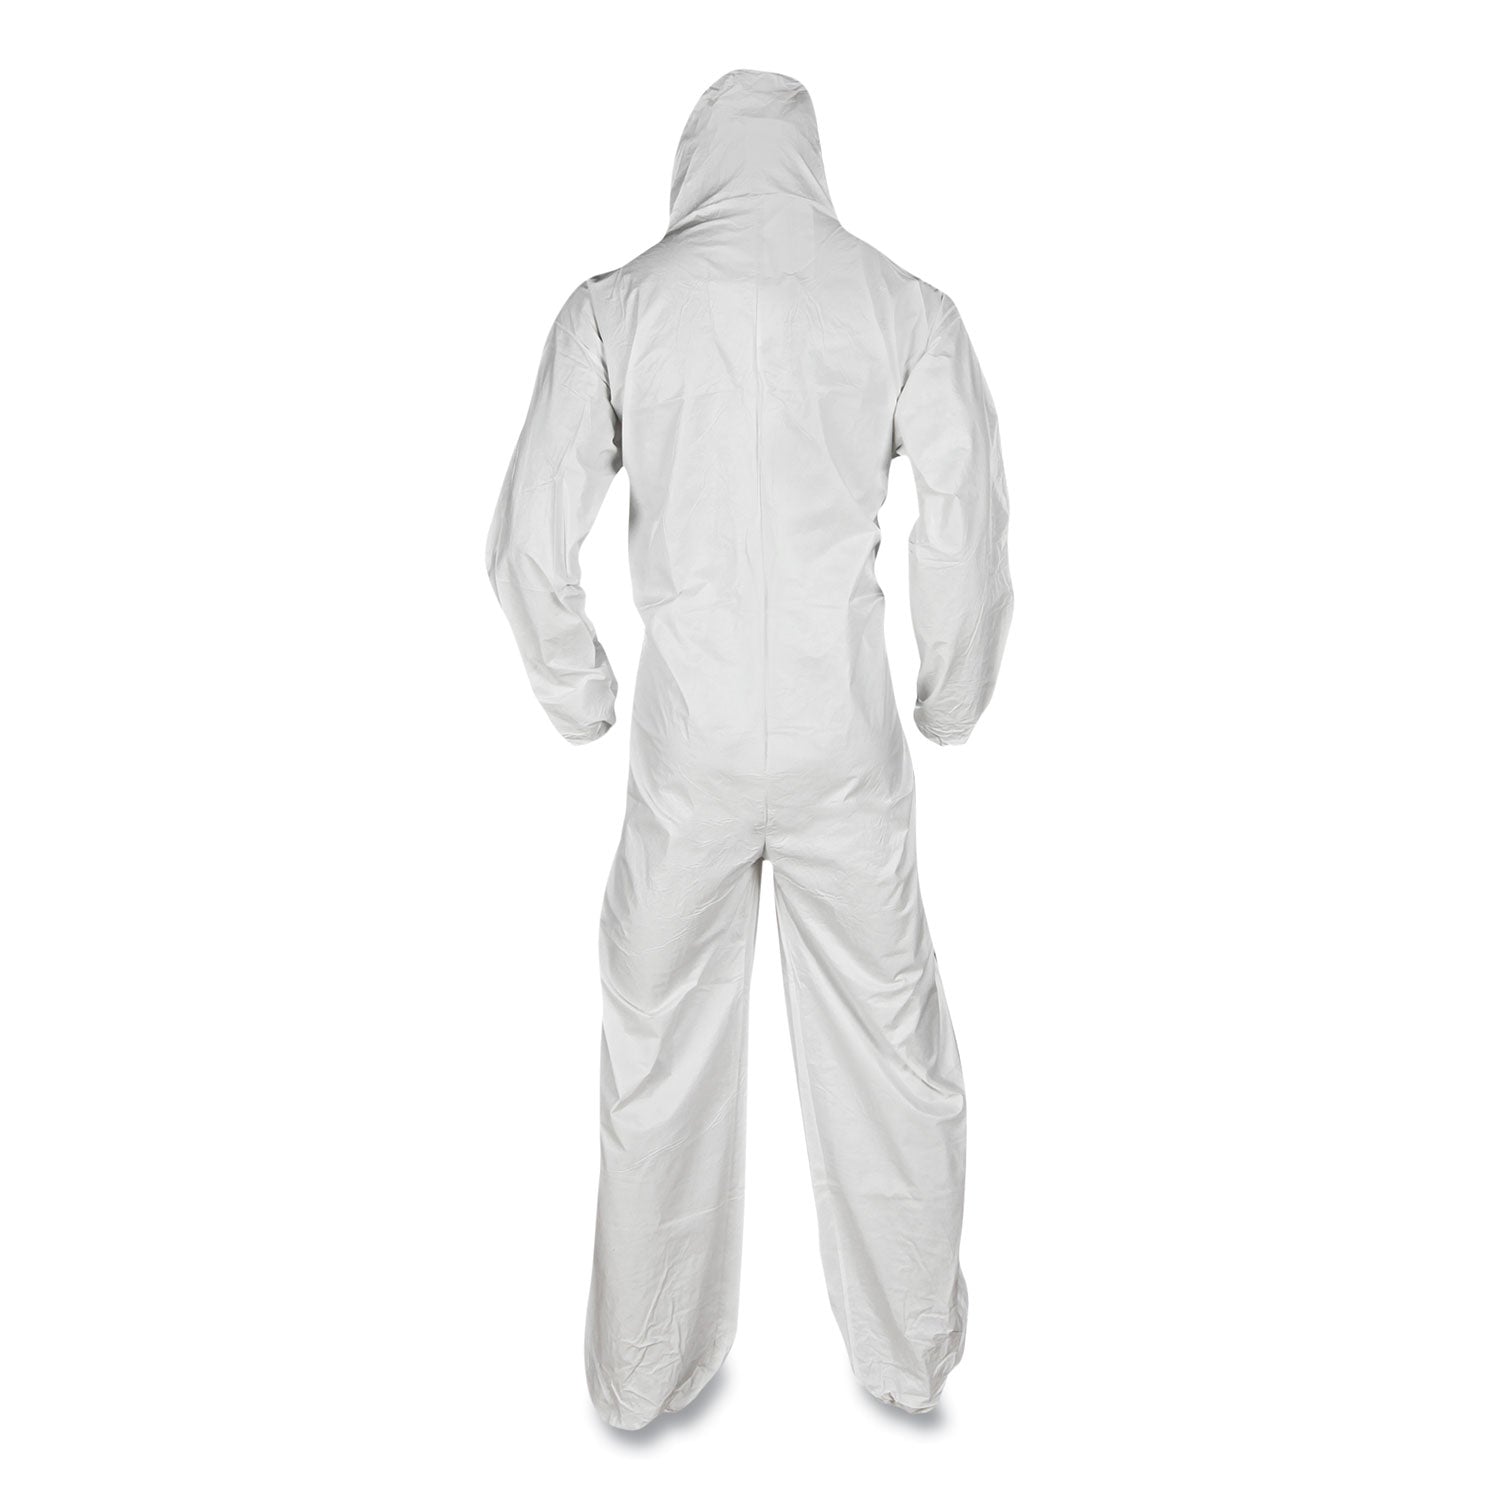 a20-breathable-particle-protection-coveralls-elastic-back-hood-and-boots-4x-large-white-20-carton_kcc49127 - 2